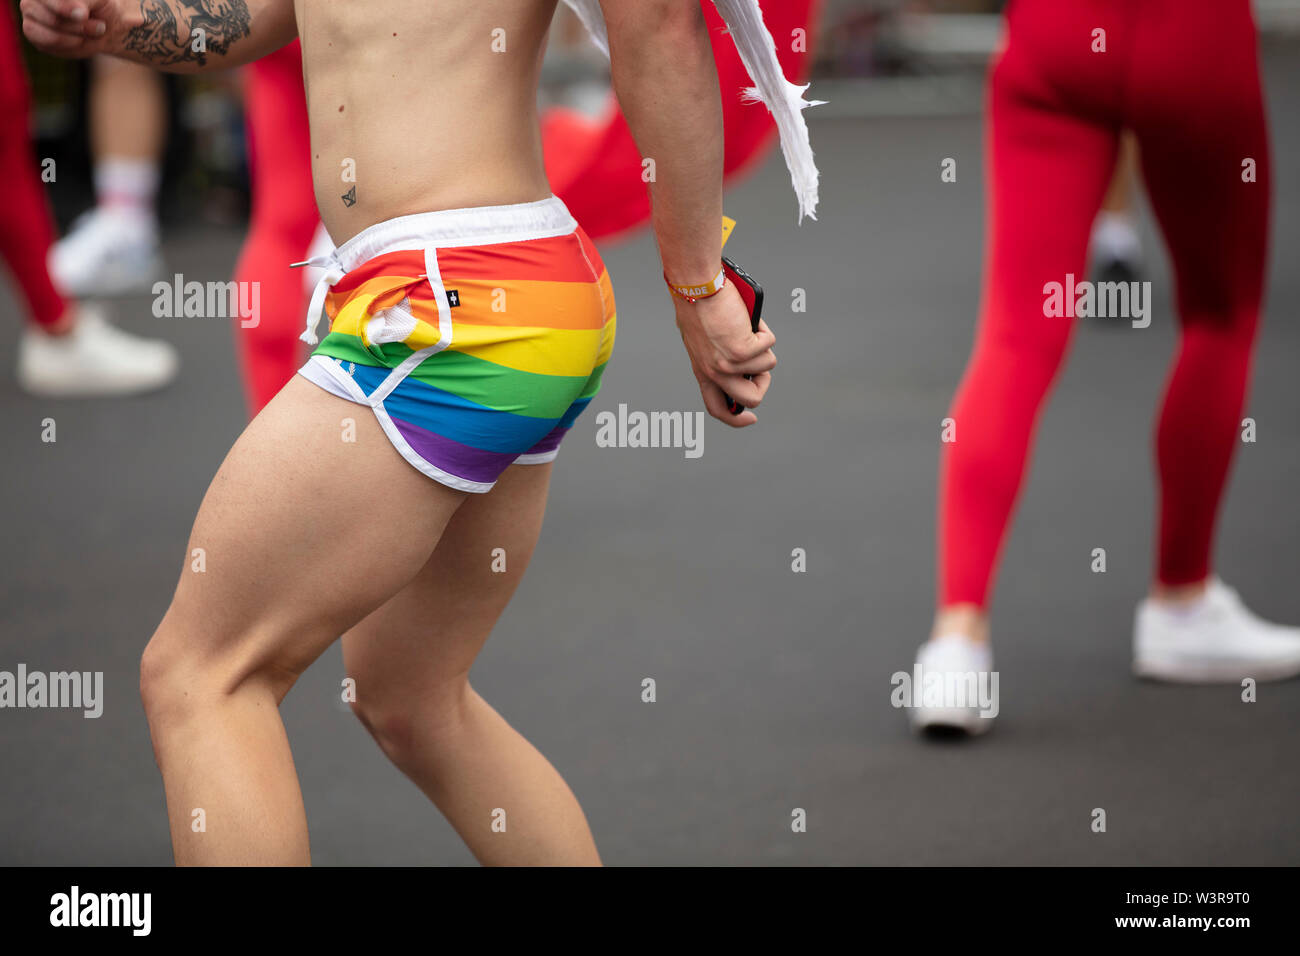 A man wearing gay pride flag shorts dancing in the street at a pride event  Stock Photo - Alamy